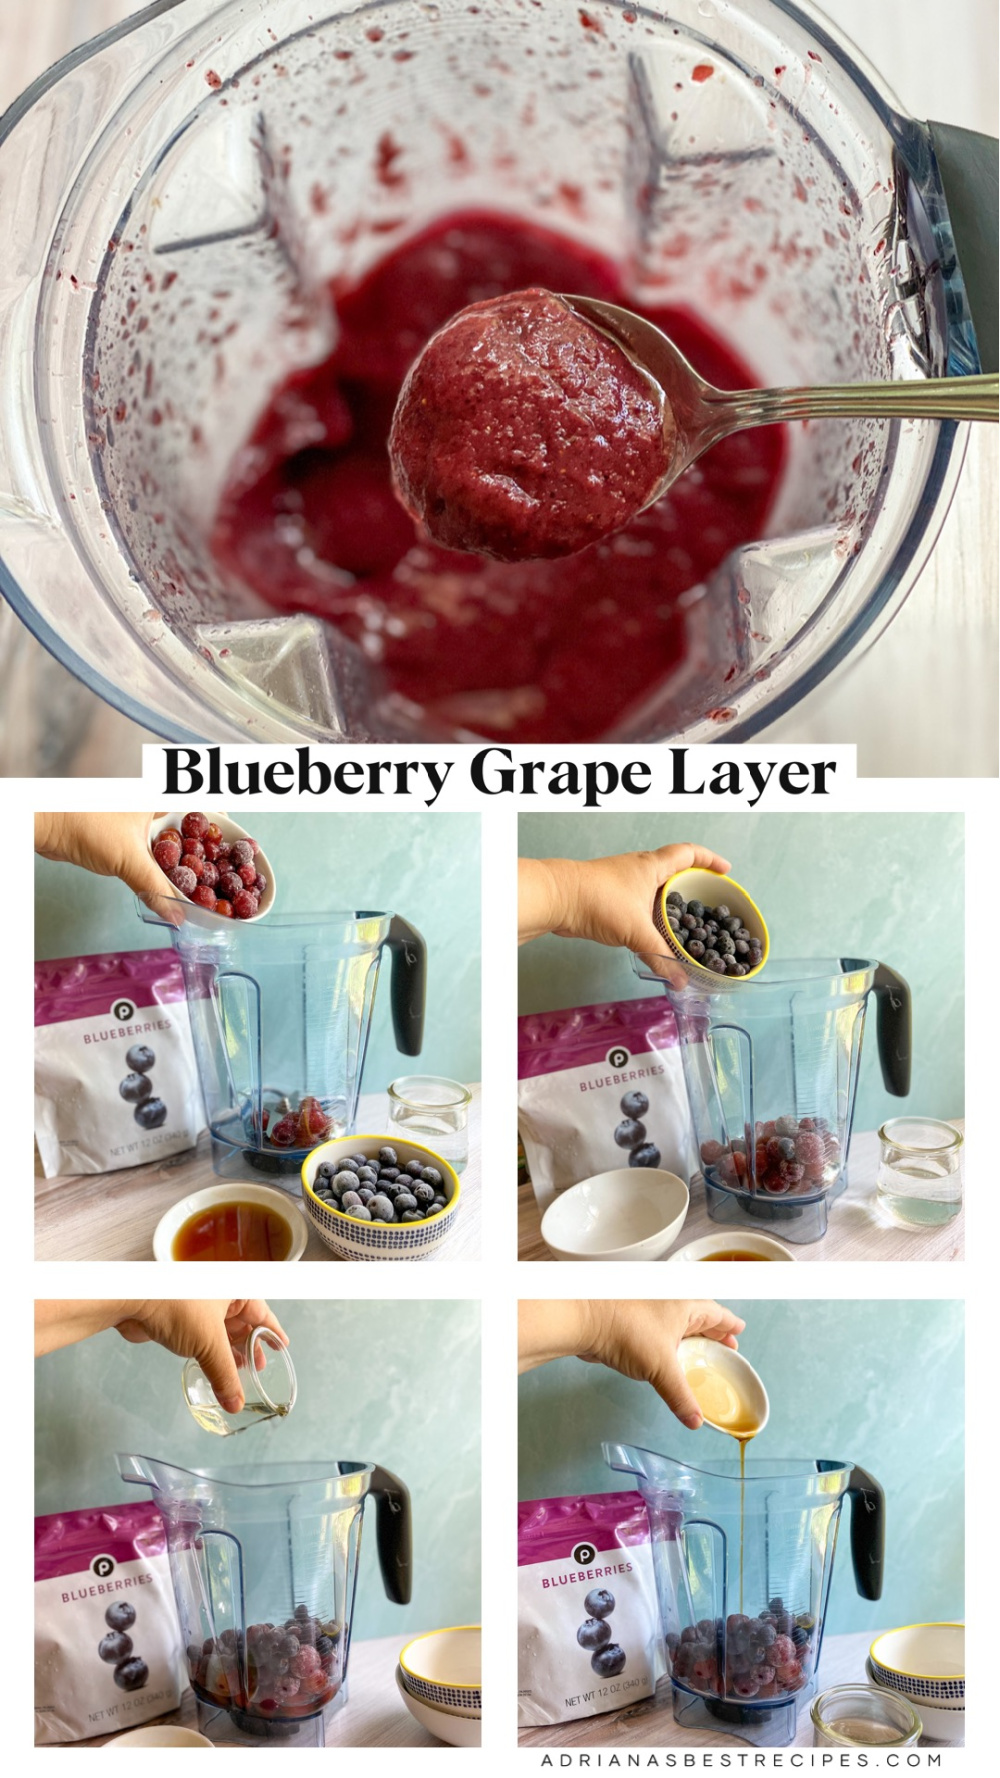 A collage with pictures showing the process on how to make the blueberry grape layer for the smoothie